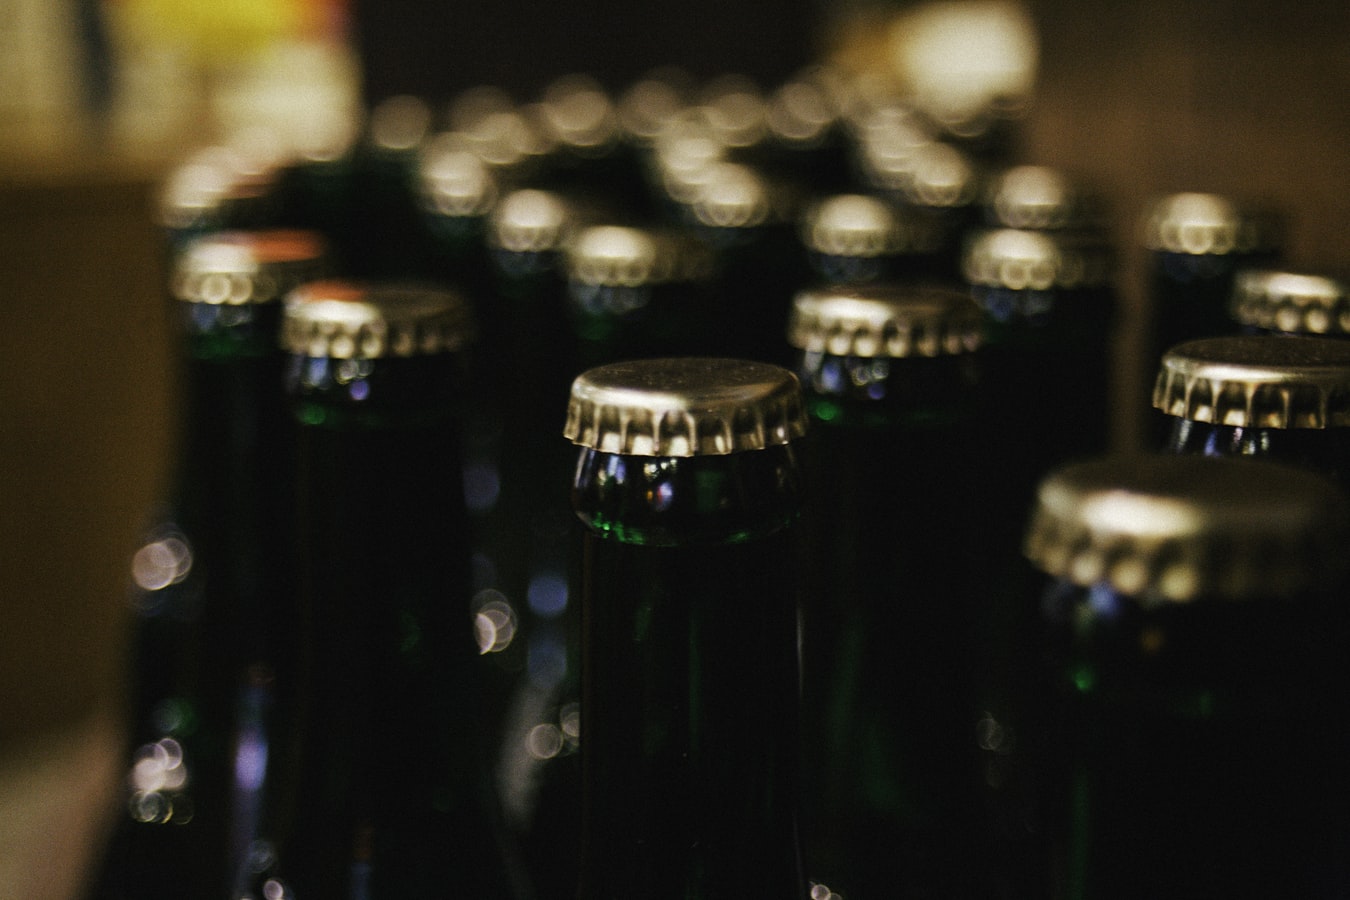 Closed beer bottles on a table. There are many dangers to mixing alcohol and morphine